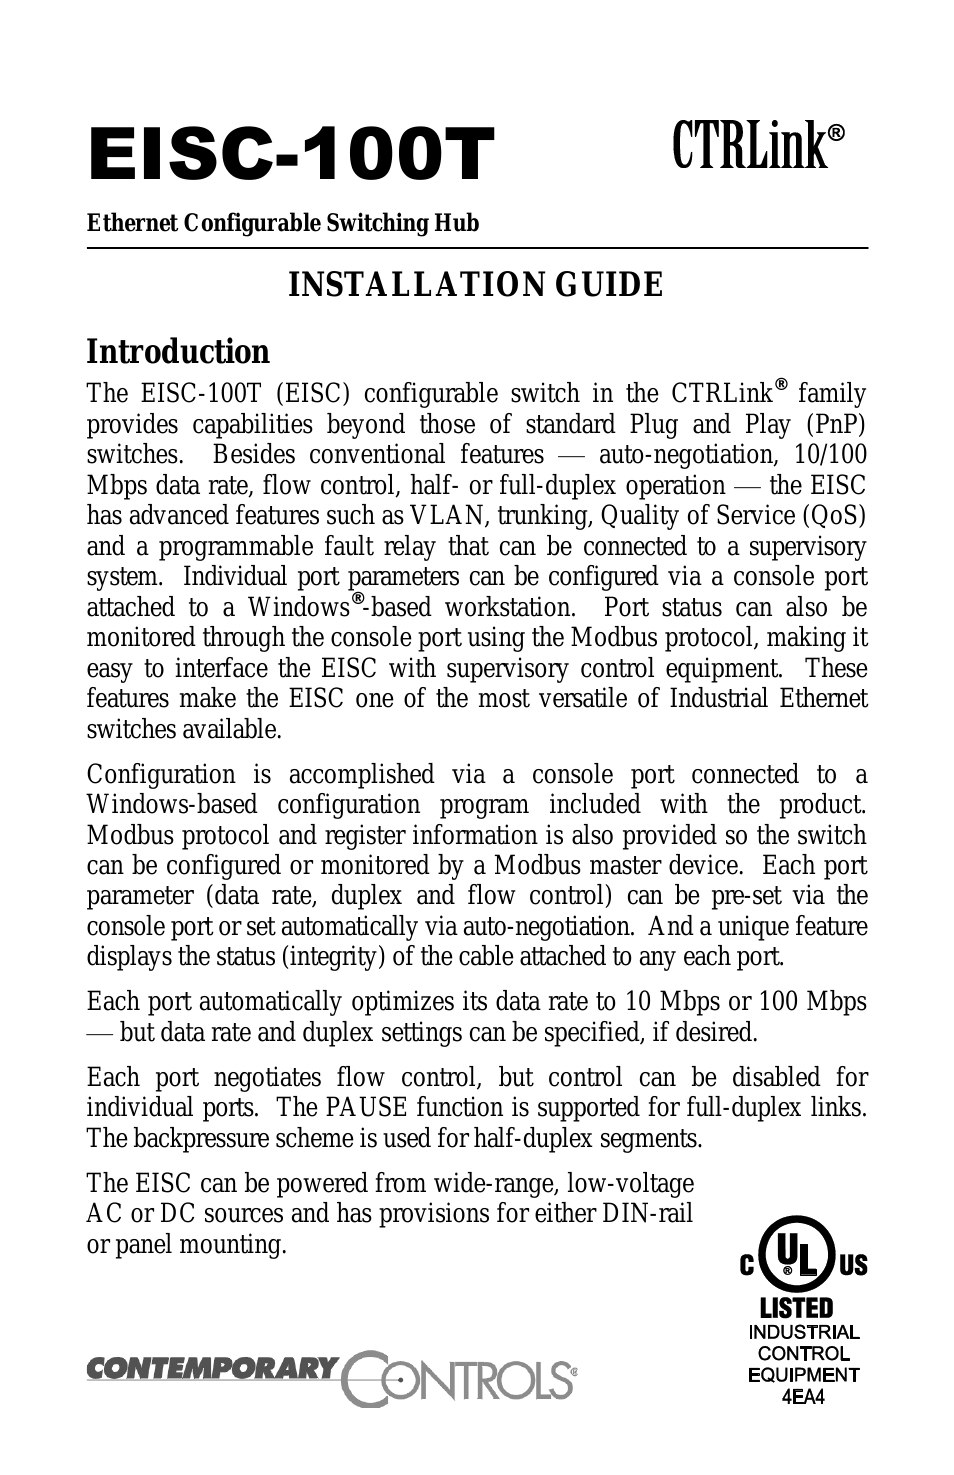 EISC Configurable Switches Installation Guide